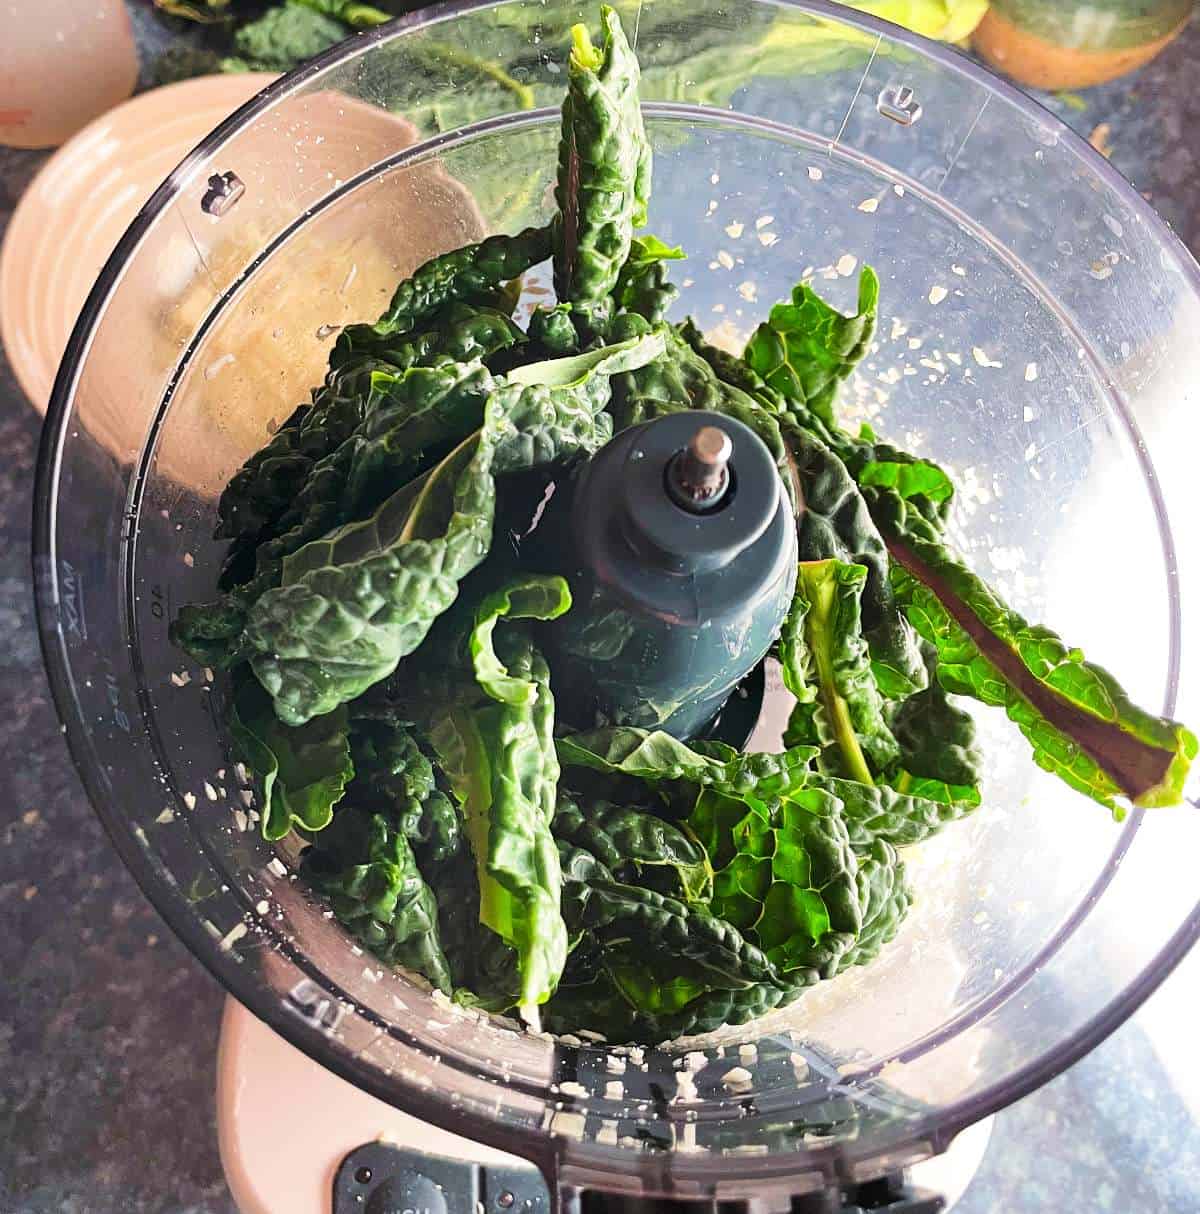 kale being chopped in a food processor for kale pesto.